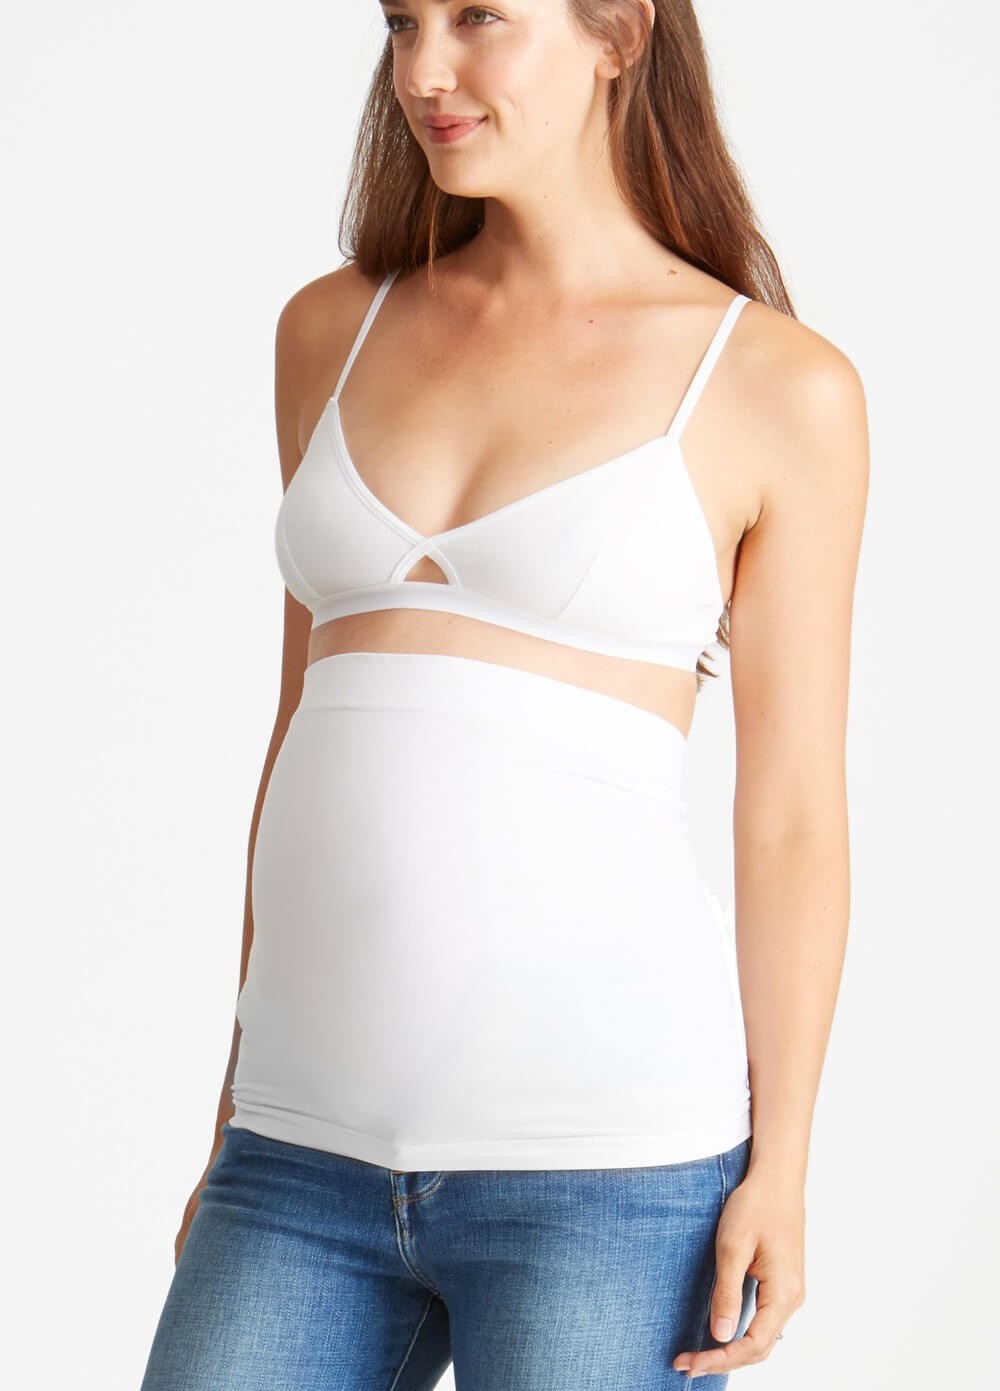 Bellaband Maternity Belly Band in White by Ingrid & Isabel